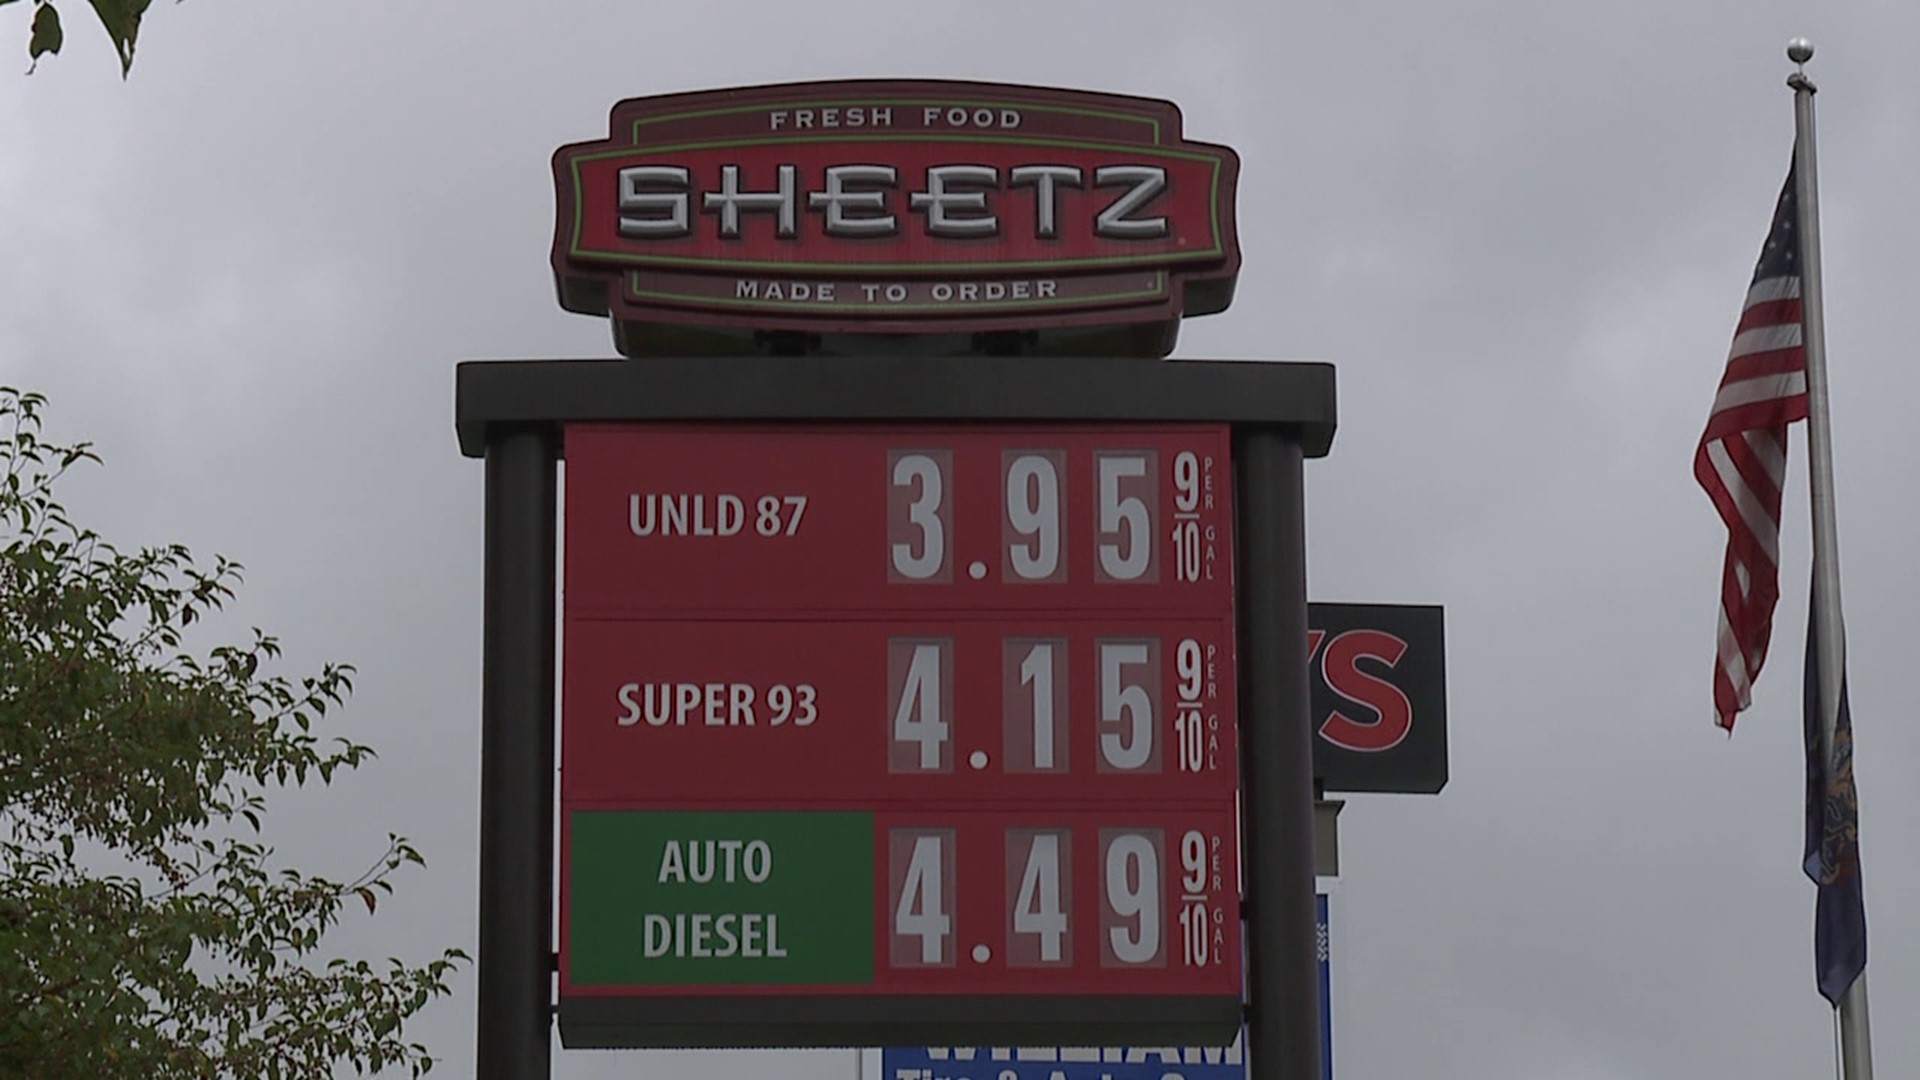 Gas prices are the lowest they've been in the last few months, but many are wondering if that trend will continue.